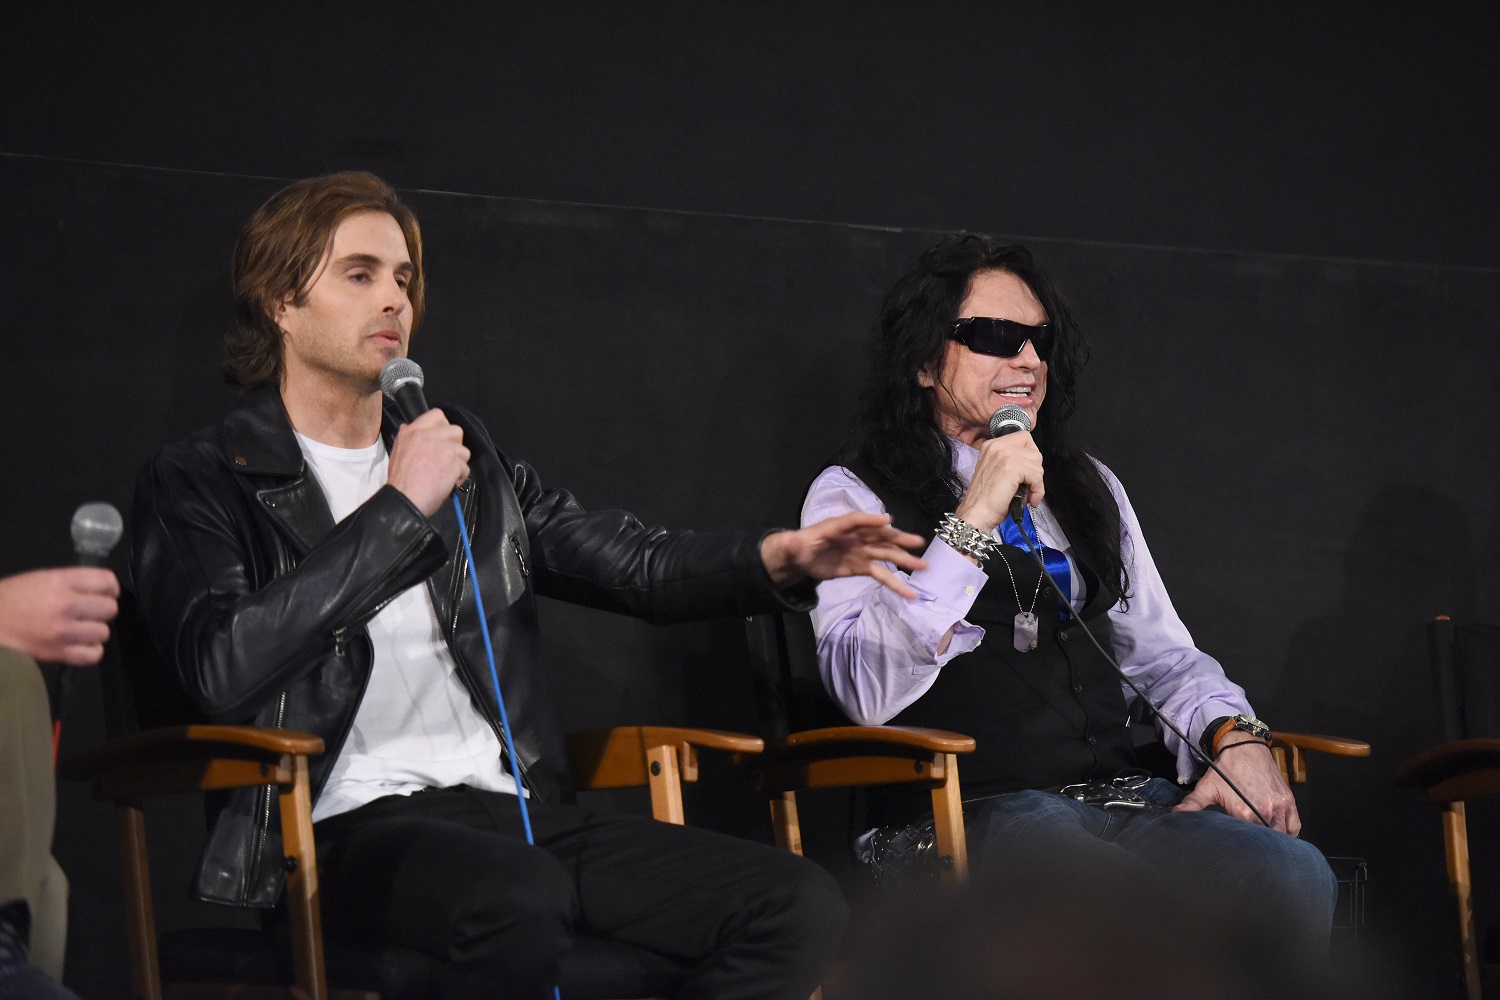 The Room actors Tommy Wiseau and Greg Sestero